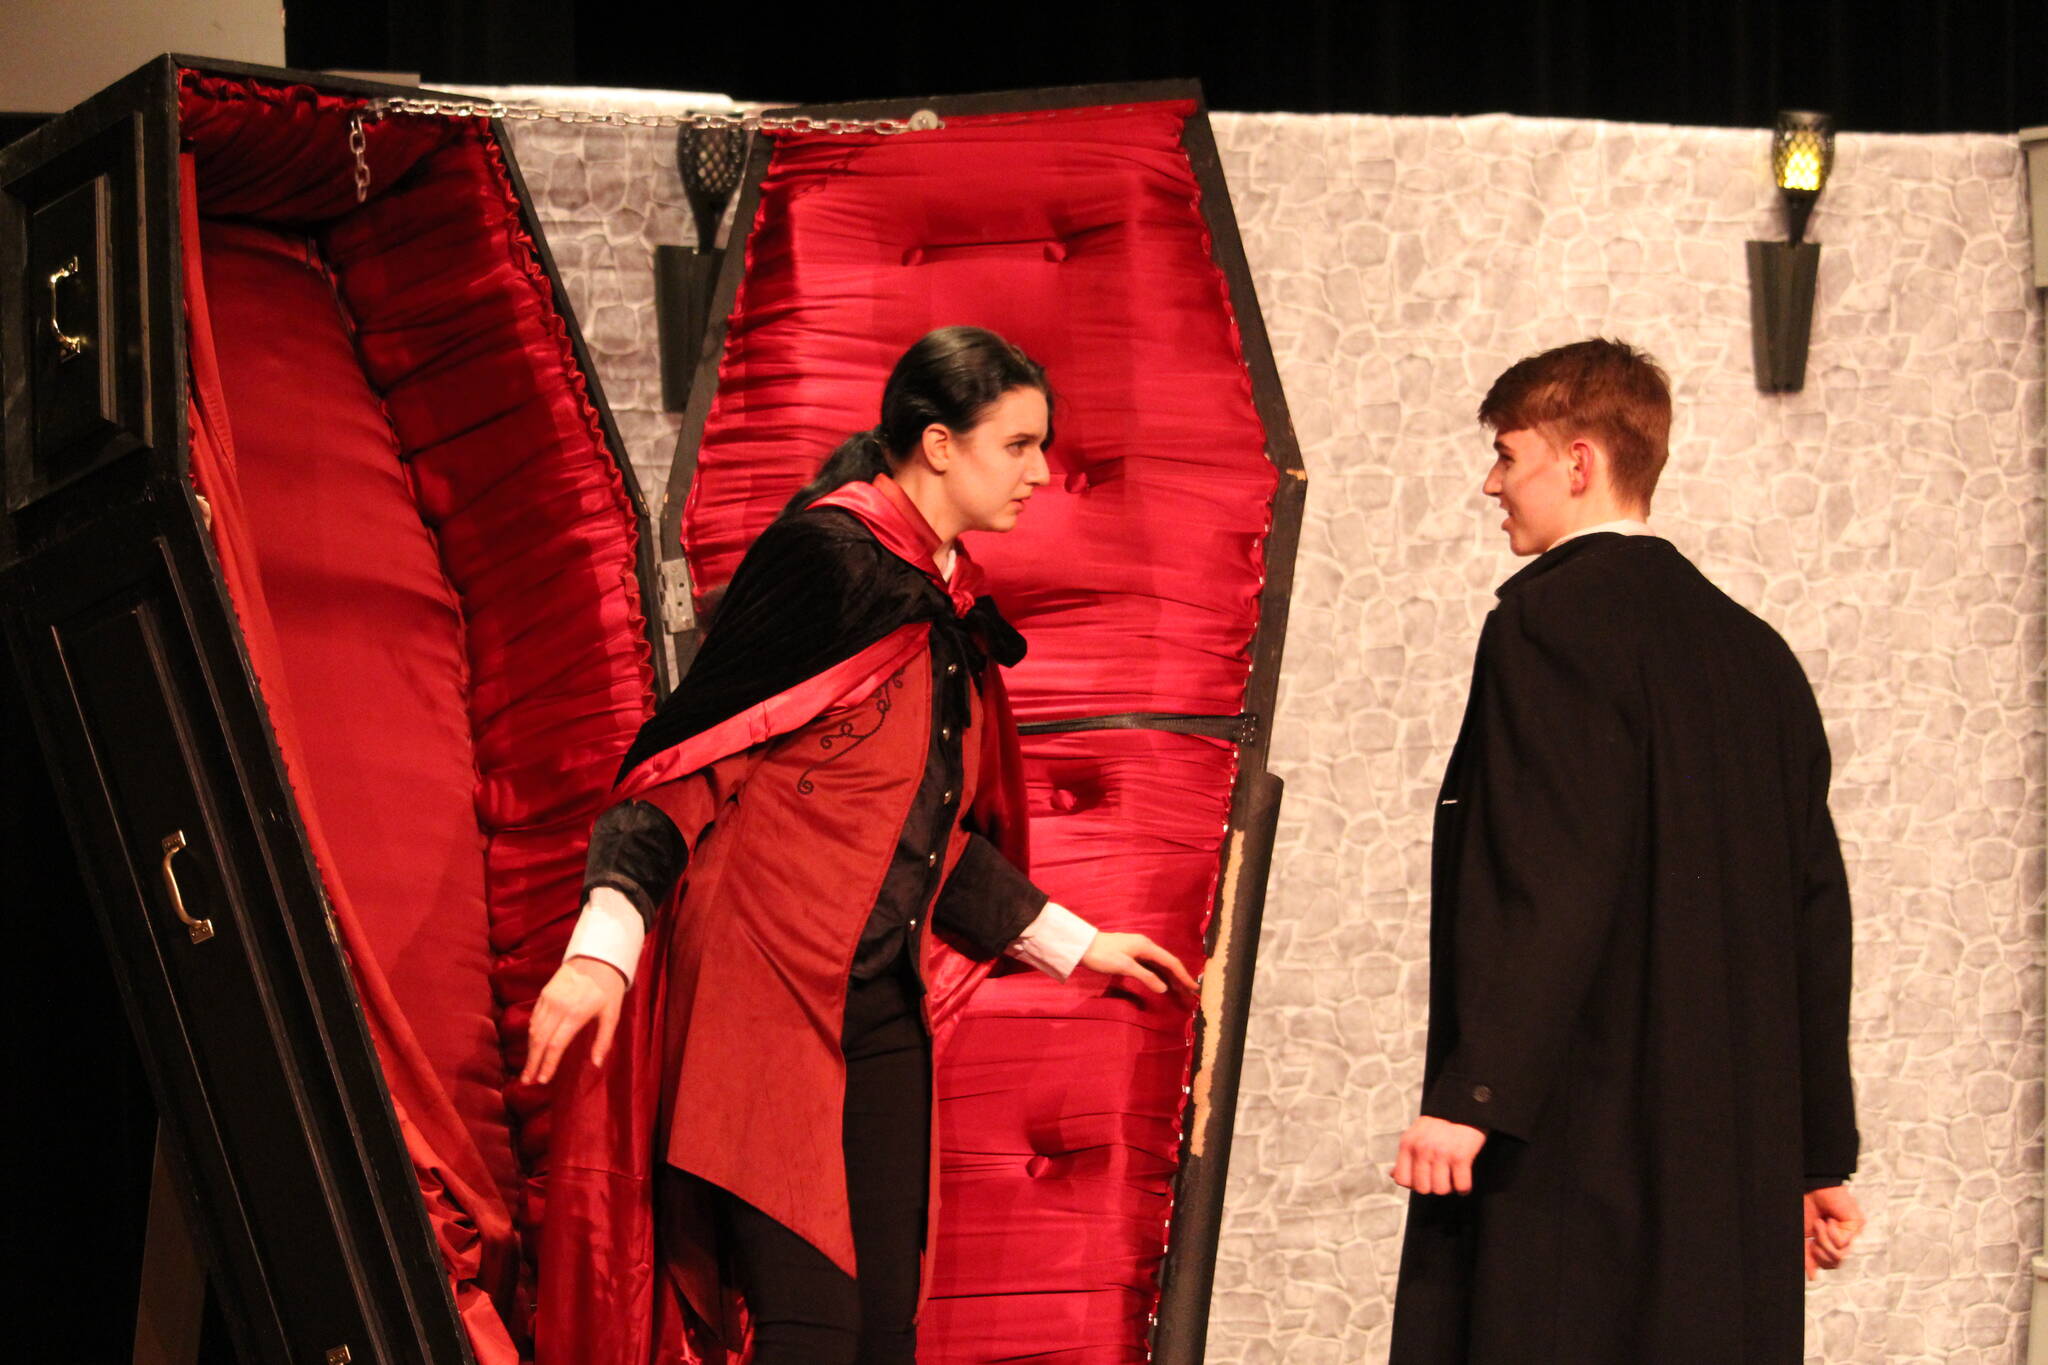 Count Dracula, played by Zoe Eisenbrey, emerges from his coffin to confront Jonathan Harker, played by Spencer Grubbs.